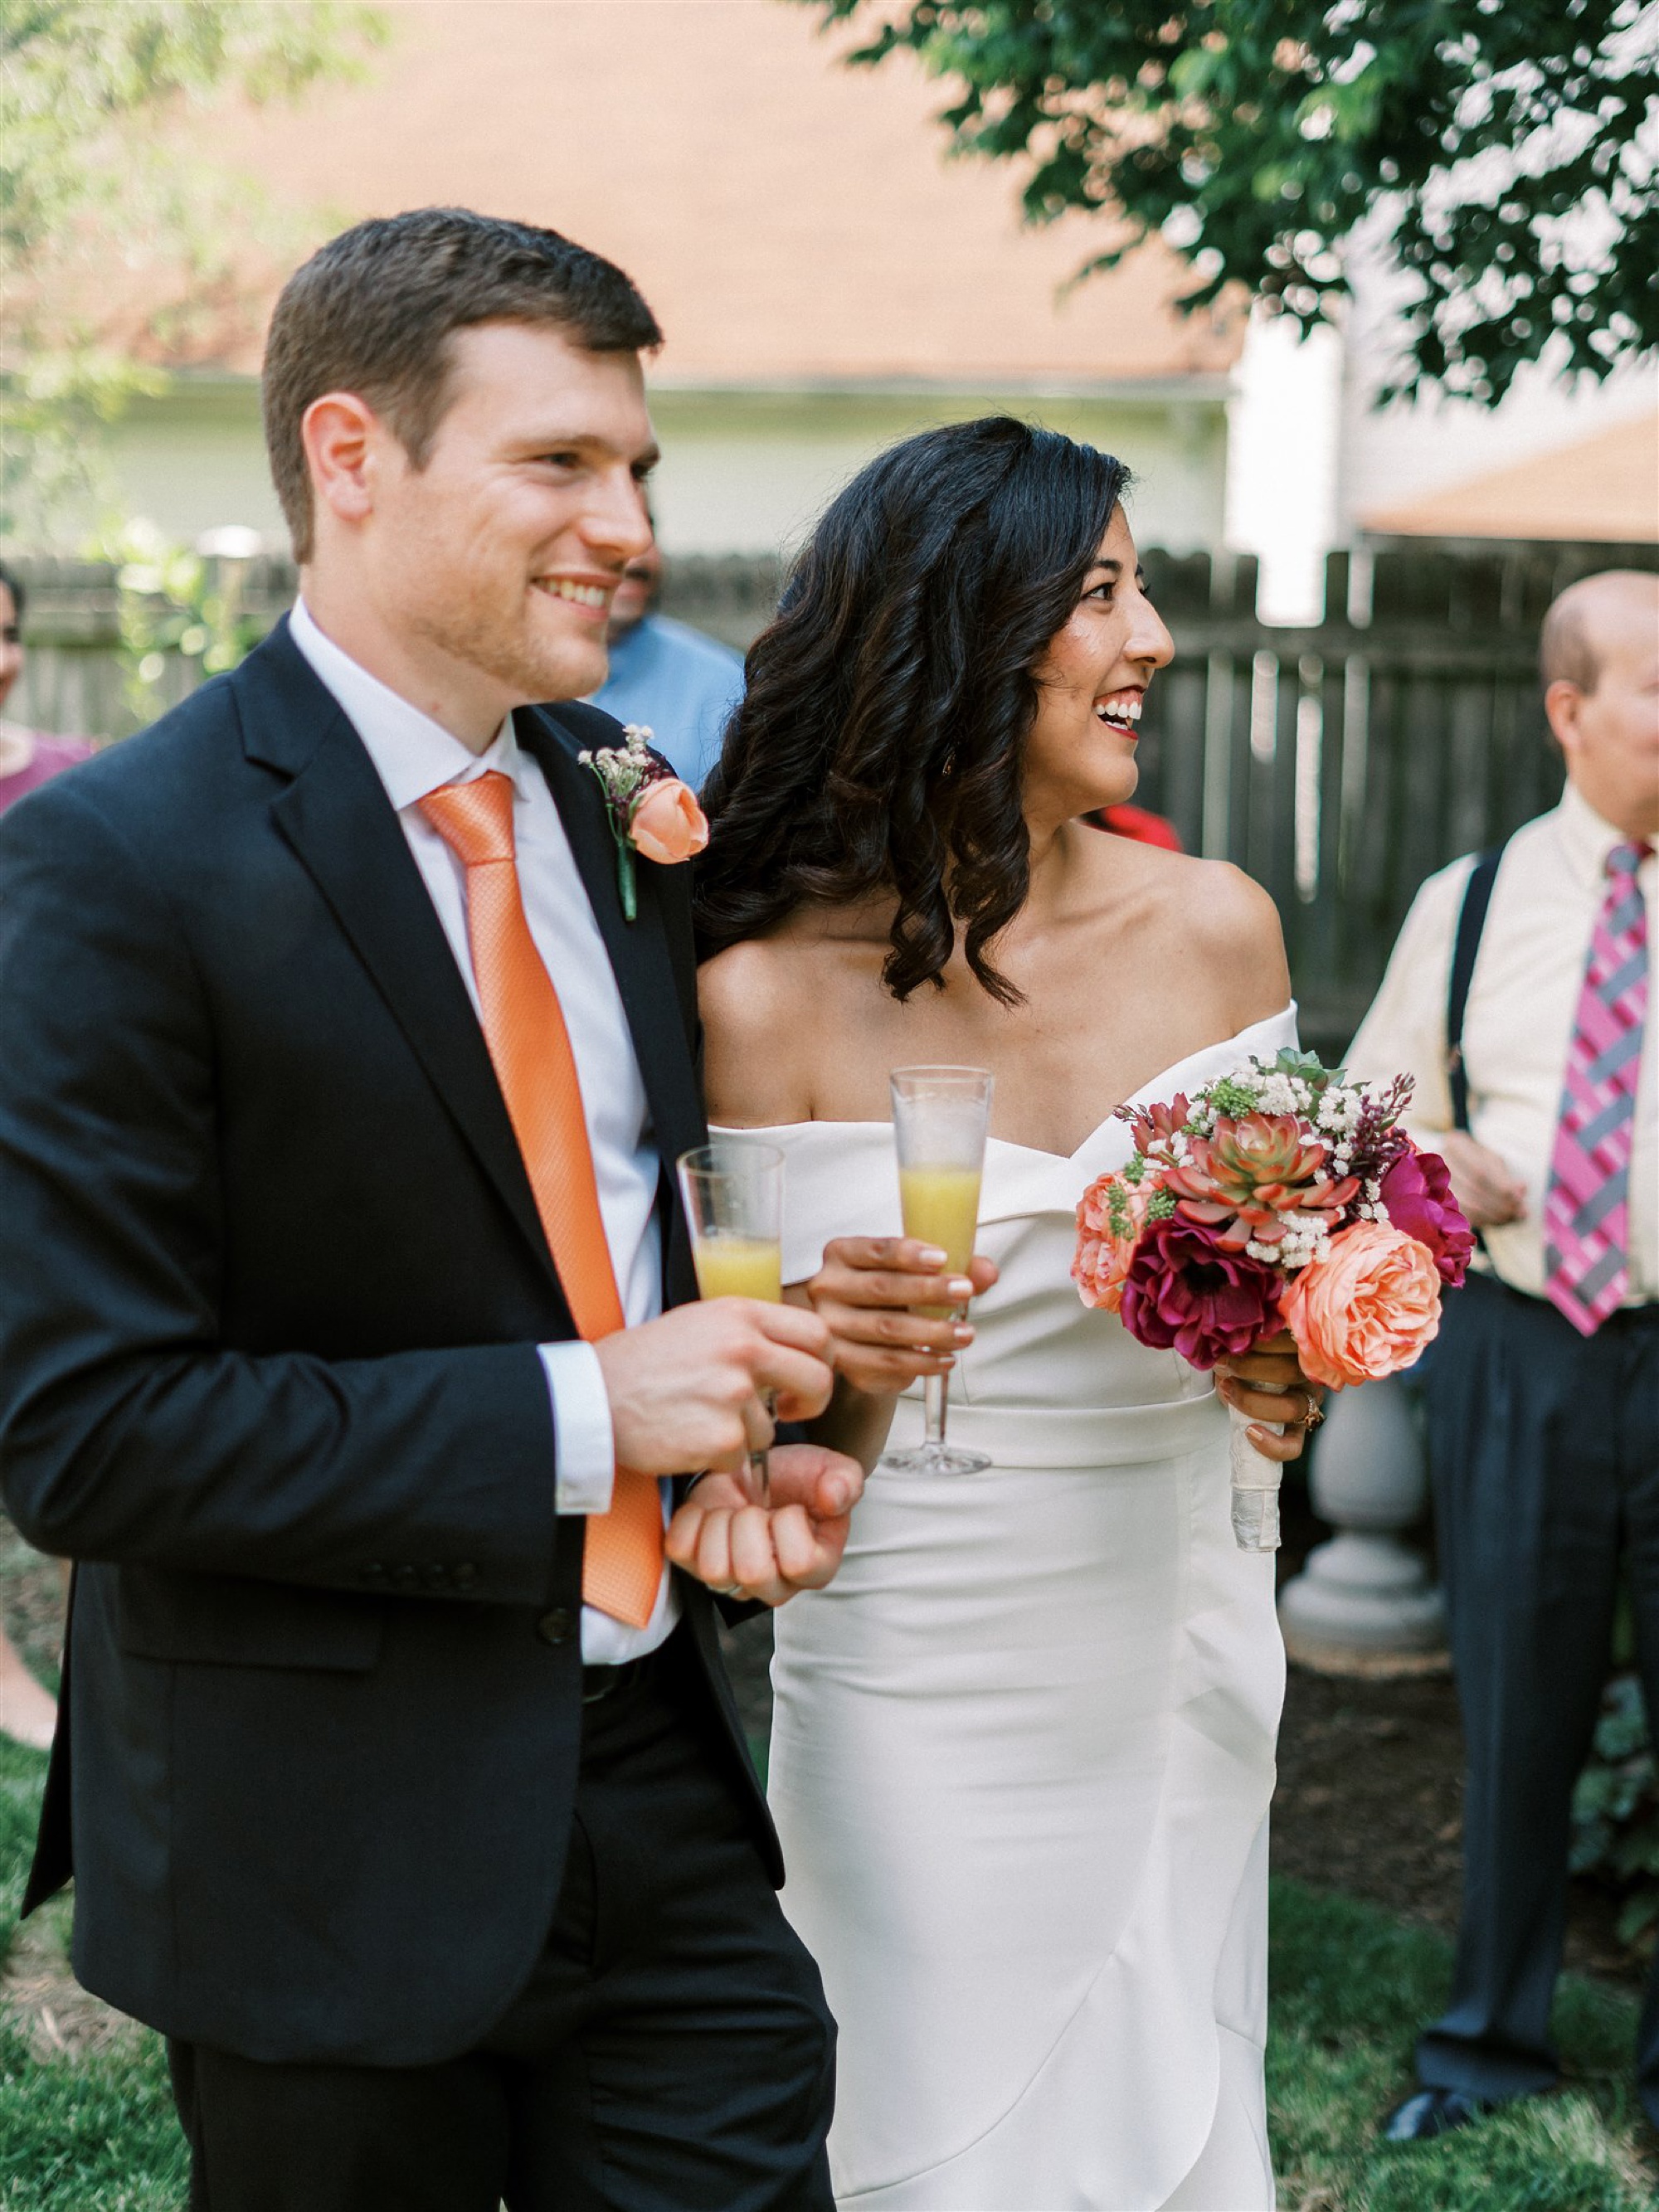 newlyweds mingle with guests during intimate backyard wedding 